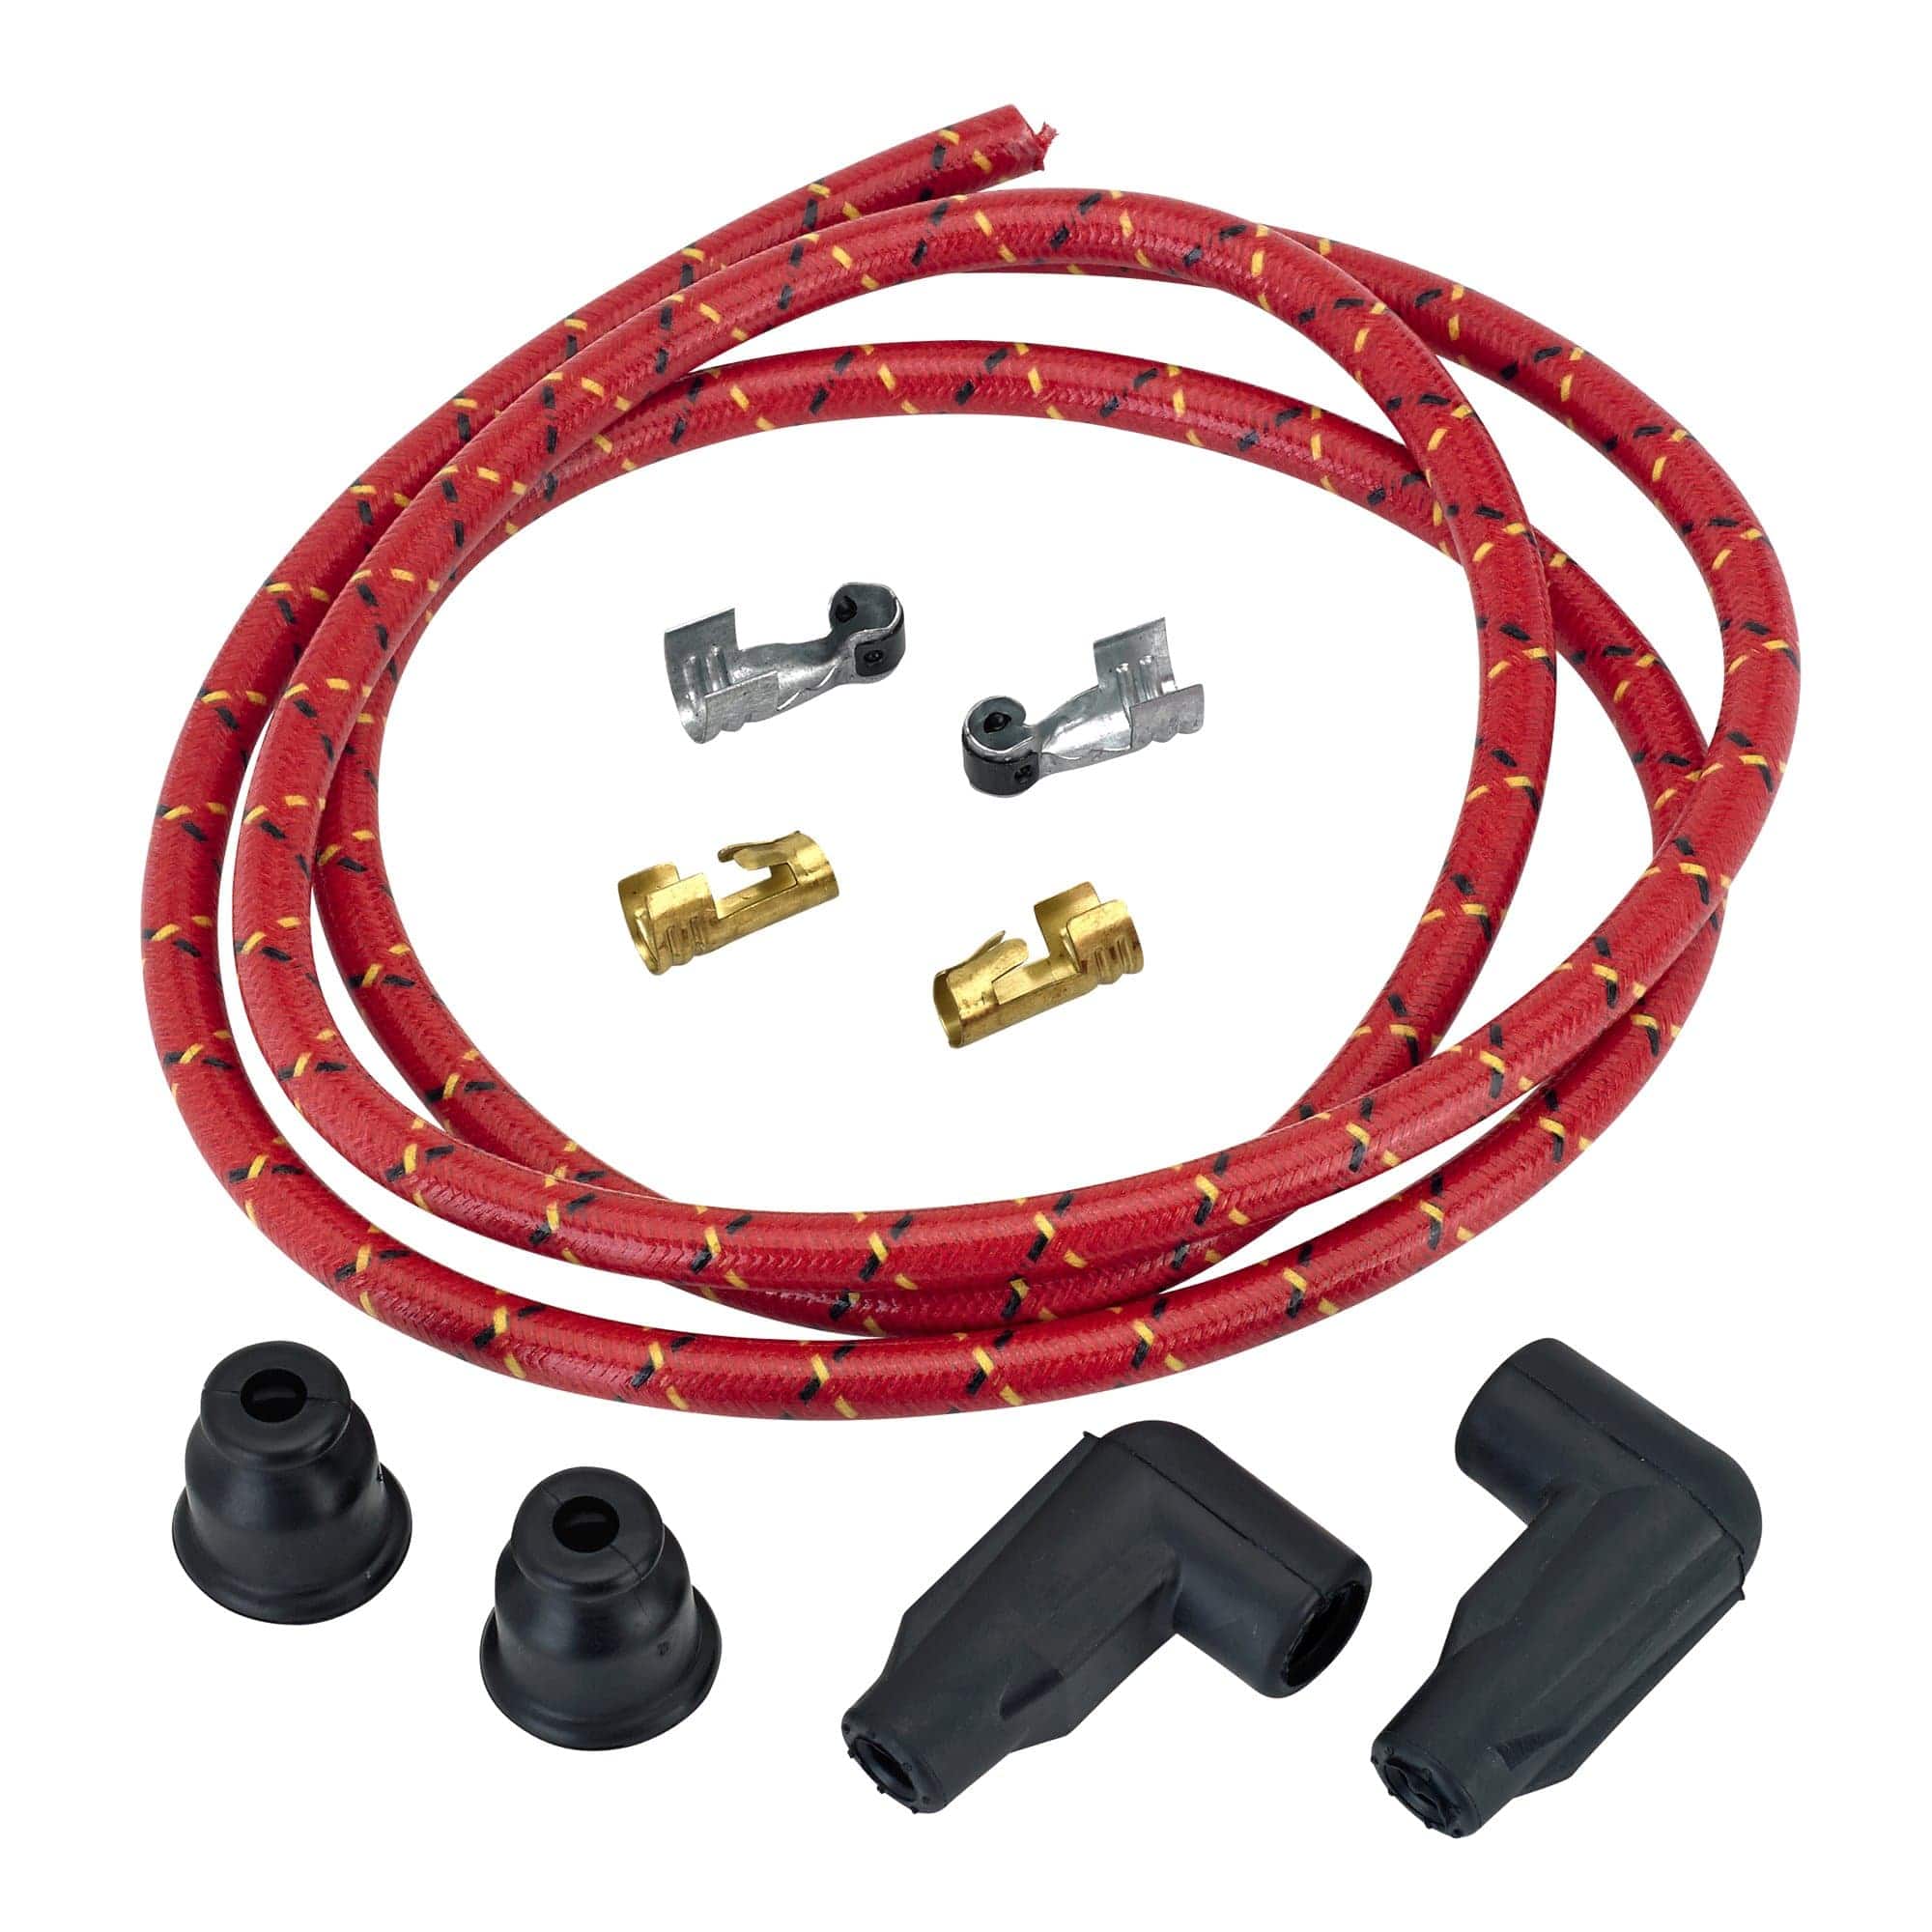 Lowbrow Customs 8mm Cloth 90 Degree Spark Plug Wire Sets - Red with Black  and Yellow tracers